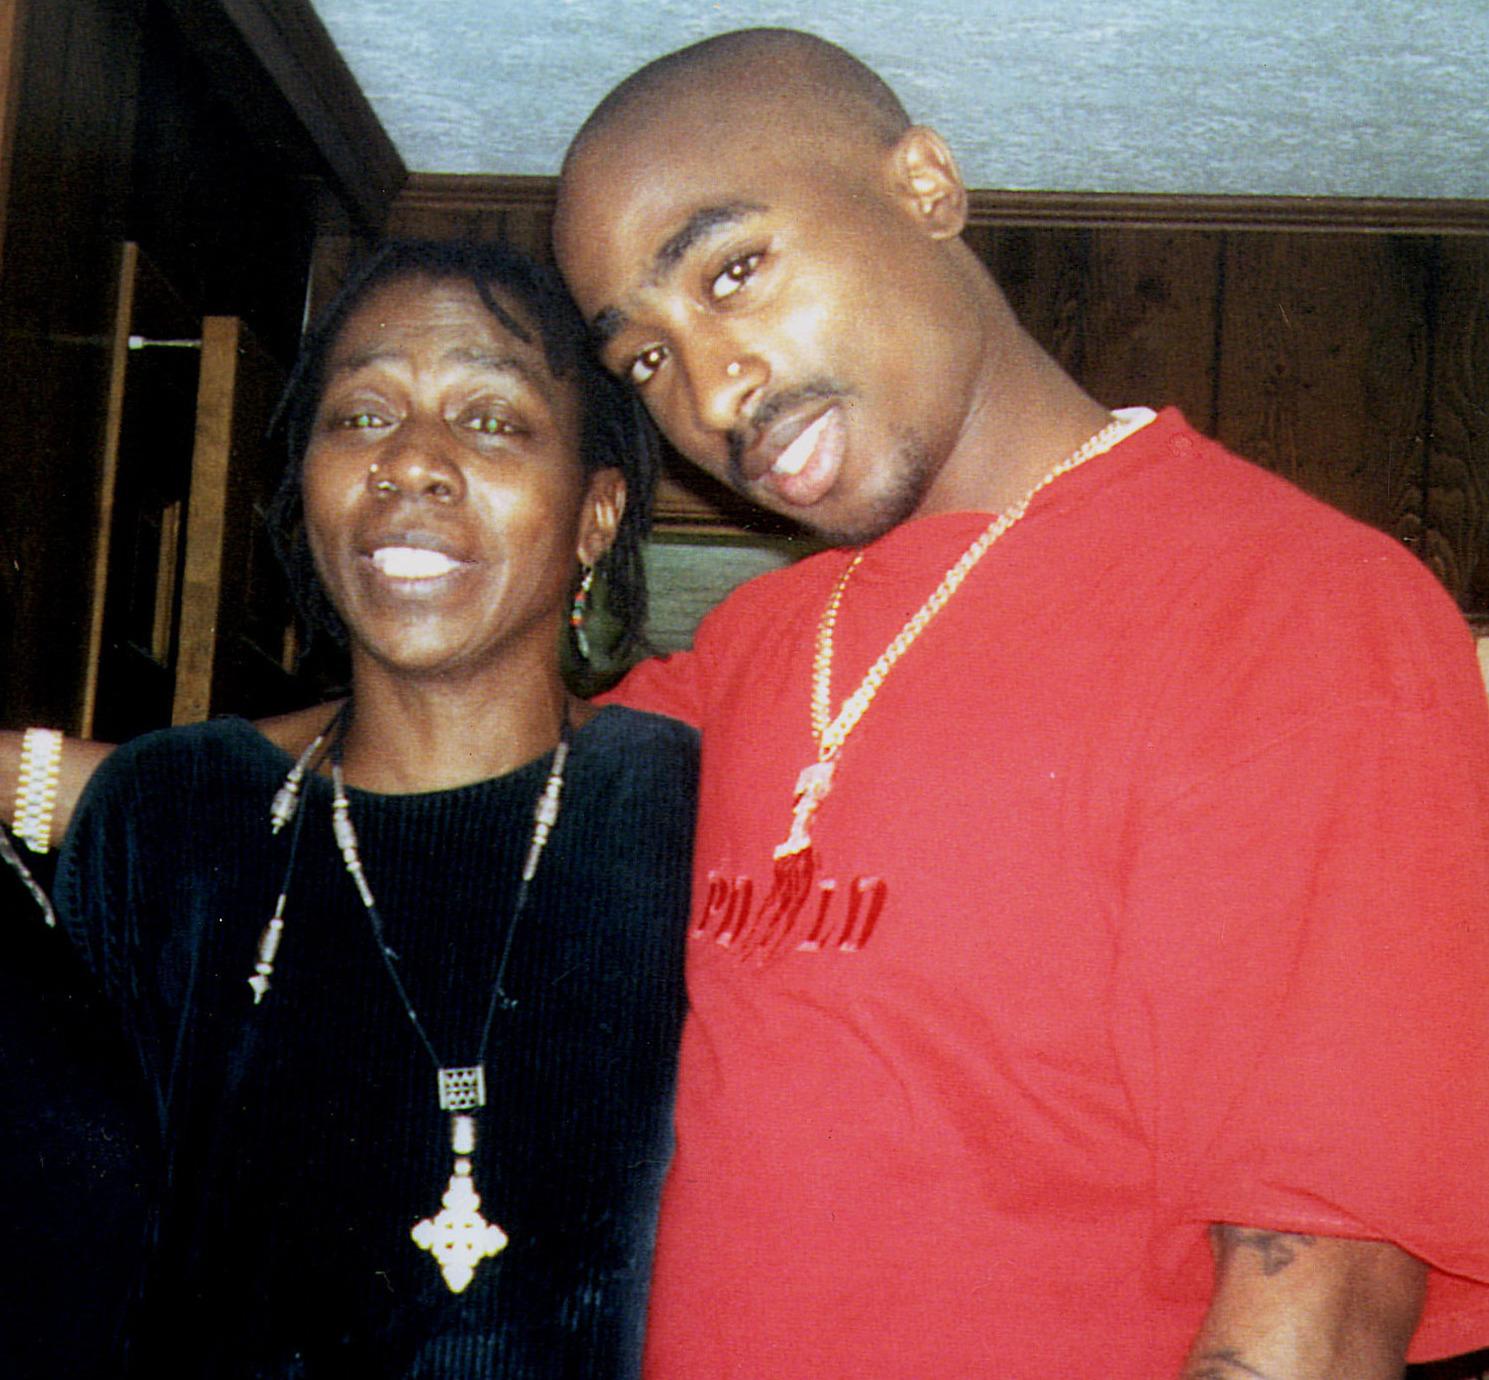 Tupac Shakur's Family At WAR Over Millions Of Dollars In His Mother's Estate